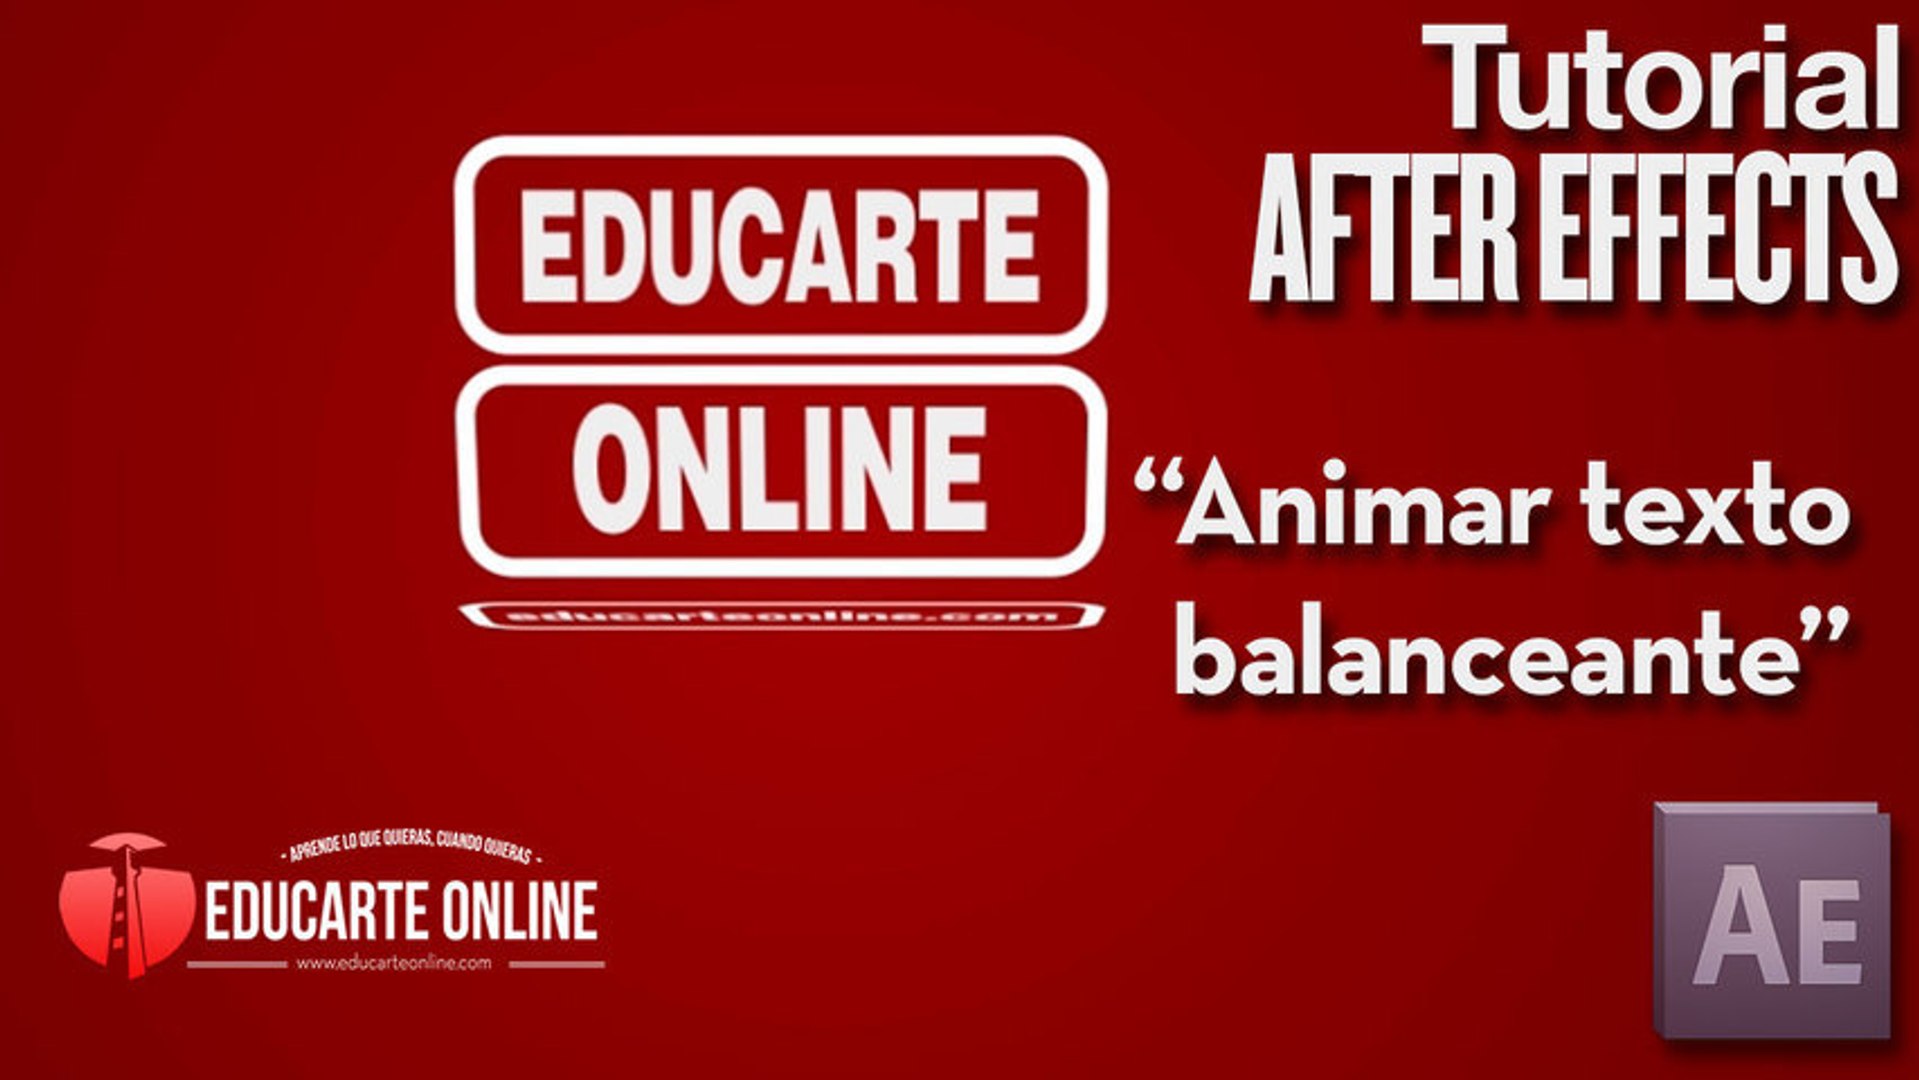 Animar texto balanceante - Tutorial After Effects - Vídeo Dailymotion